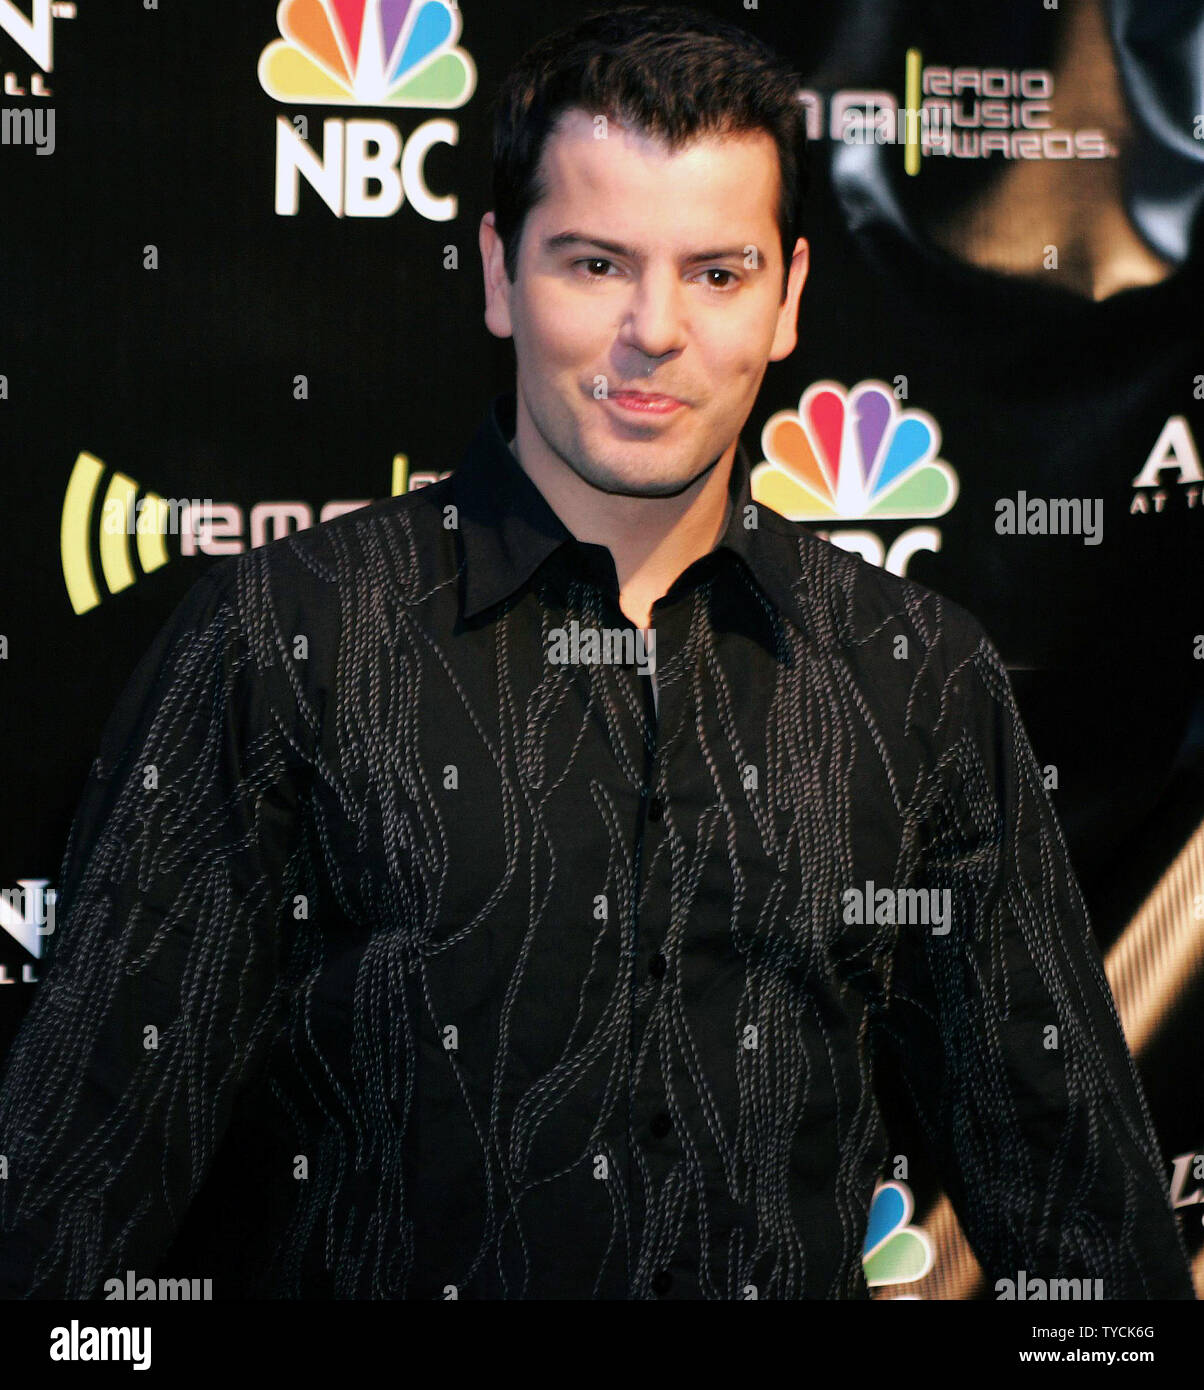 Jordan Knight of New Kids on the Block appeared at the 2004 Radio Music  Awards Show at the Aladdin Hotel and Casino, October 25, 2004. (UPI  Photo/Roger Williams Stock Photo - Alamy